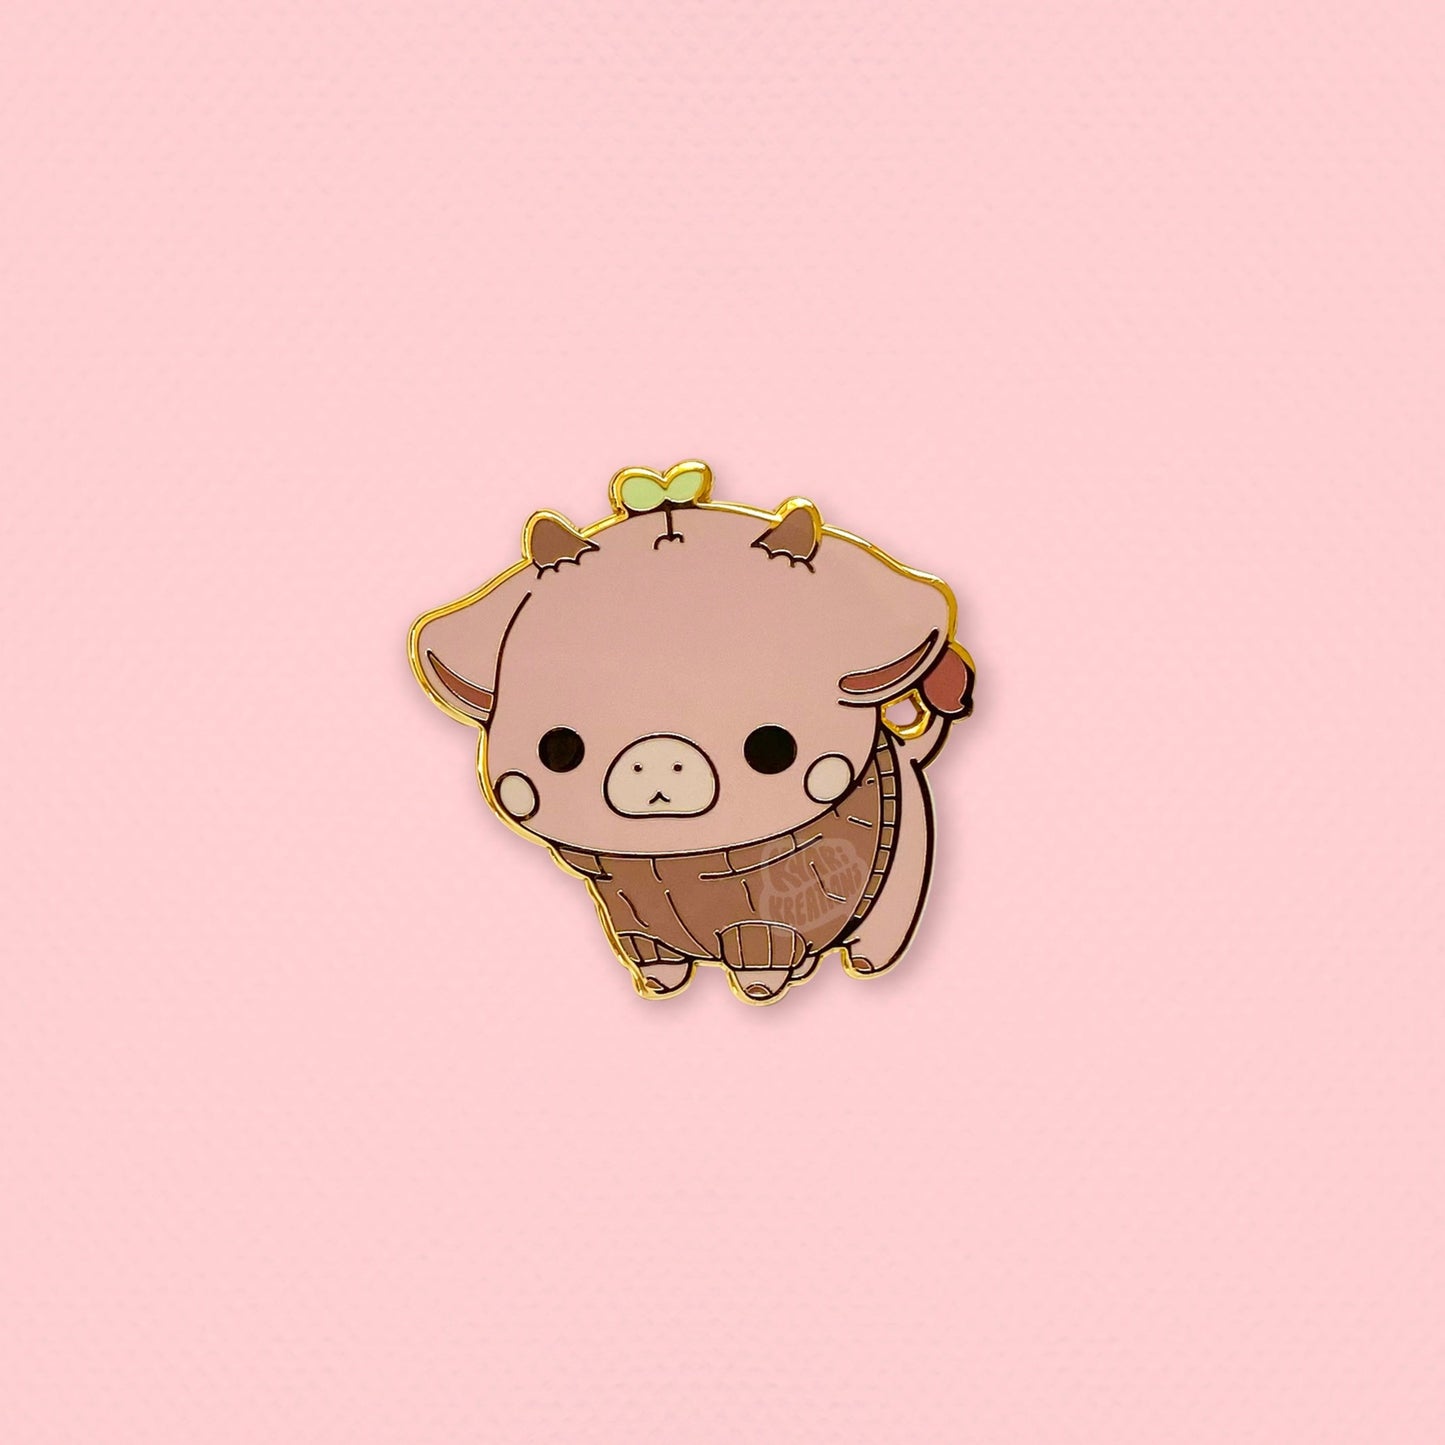 Highland Cow In A Sweater Enamel Pin - KyariKreations